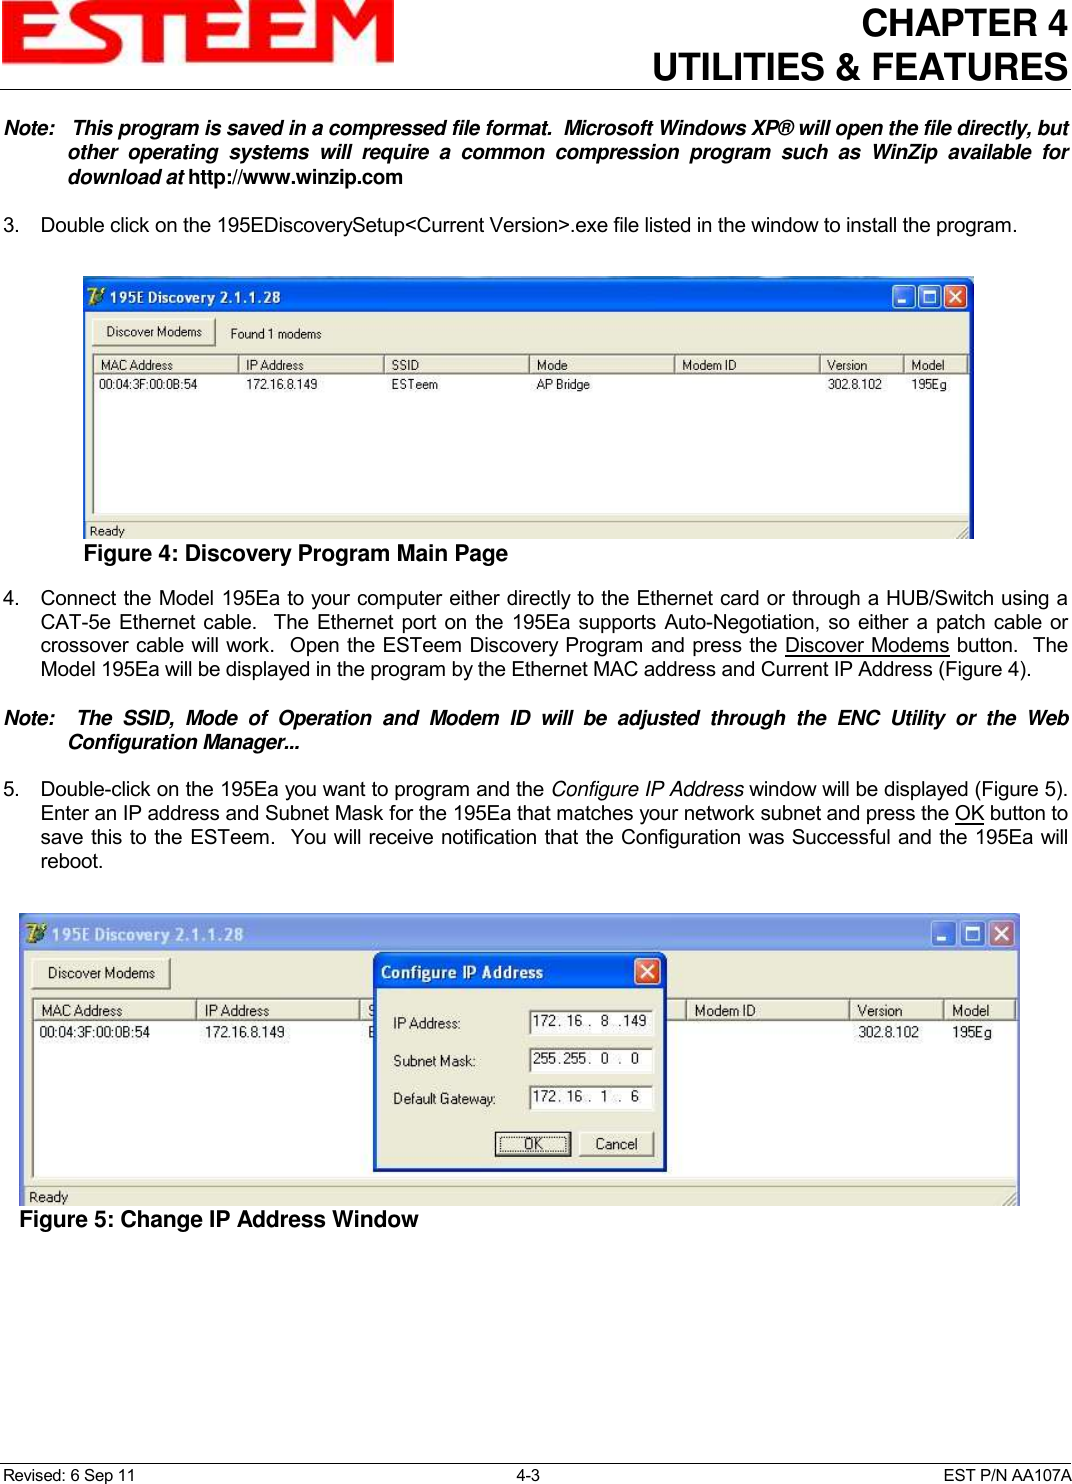 CHAPTER 4   UTILITIES &amp; FEATURES  Revised: 6 Sep 11  4-3  EST P/N AA107A Note:   This program is saved in a compressed file format.  Microsoft Windows XP® will open the file directly, but other  operating  systems  will  require  a  common  compression  program  such  as  WinZip  available  for download at http://www.winzip.com  3.  Double click on the 195EDiscoverySetup&lt;Current Version&gt;.exe file listed in the window to install the program.  4.  Connect the Model 195Ea to your computer either directly to the Ethernet card or through a HUB/Switch using a CAT-5e Ethernet  cable.   The Ethernet port on  the 195Ea  supports Auto-Negotiation, so either a patch cable  or crossover cable will work.  Open the ESTeem Discovery Program and press the Discover Modems button.  The Model 195Ea will be displayed in the program by the Ethernet MAC address and Current IP Address (Figure 4).    Note:    The  SSID,  Mode  of  Operation  and  Modem  ID  will  be  adjusted  through  the  ENC  Utility  or  the  Web Configuration Manager...     5.  Double-click on the 195Ea you want to program and the Configure IP Address window will be displayed (Figure 5). Enter an IP address and Subnet Mask for the 195Ea that matches your network subnet and press the OK button to save this to the ESTeem.  You will receive notification that the Configuration was Successful and the 195Ea will reboot.   Figure 4: Discovery Program Main Page  Figure 5: Change IP Address Window  